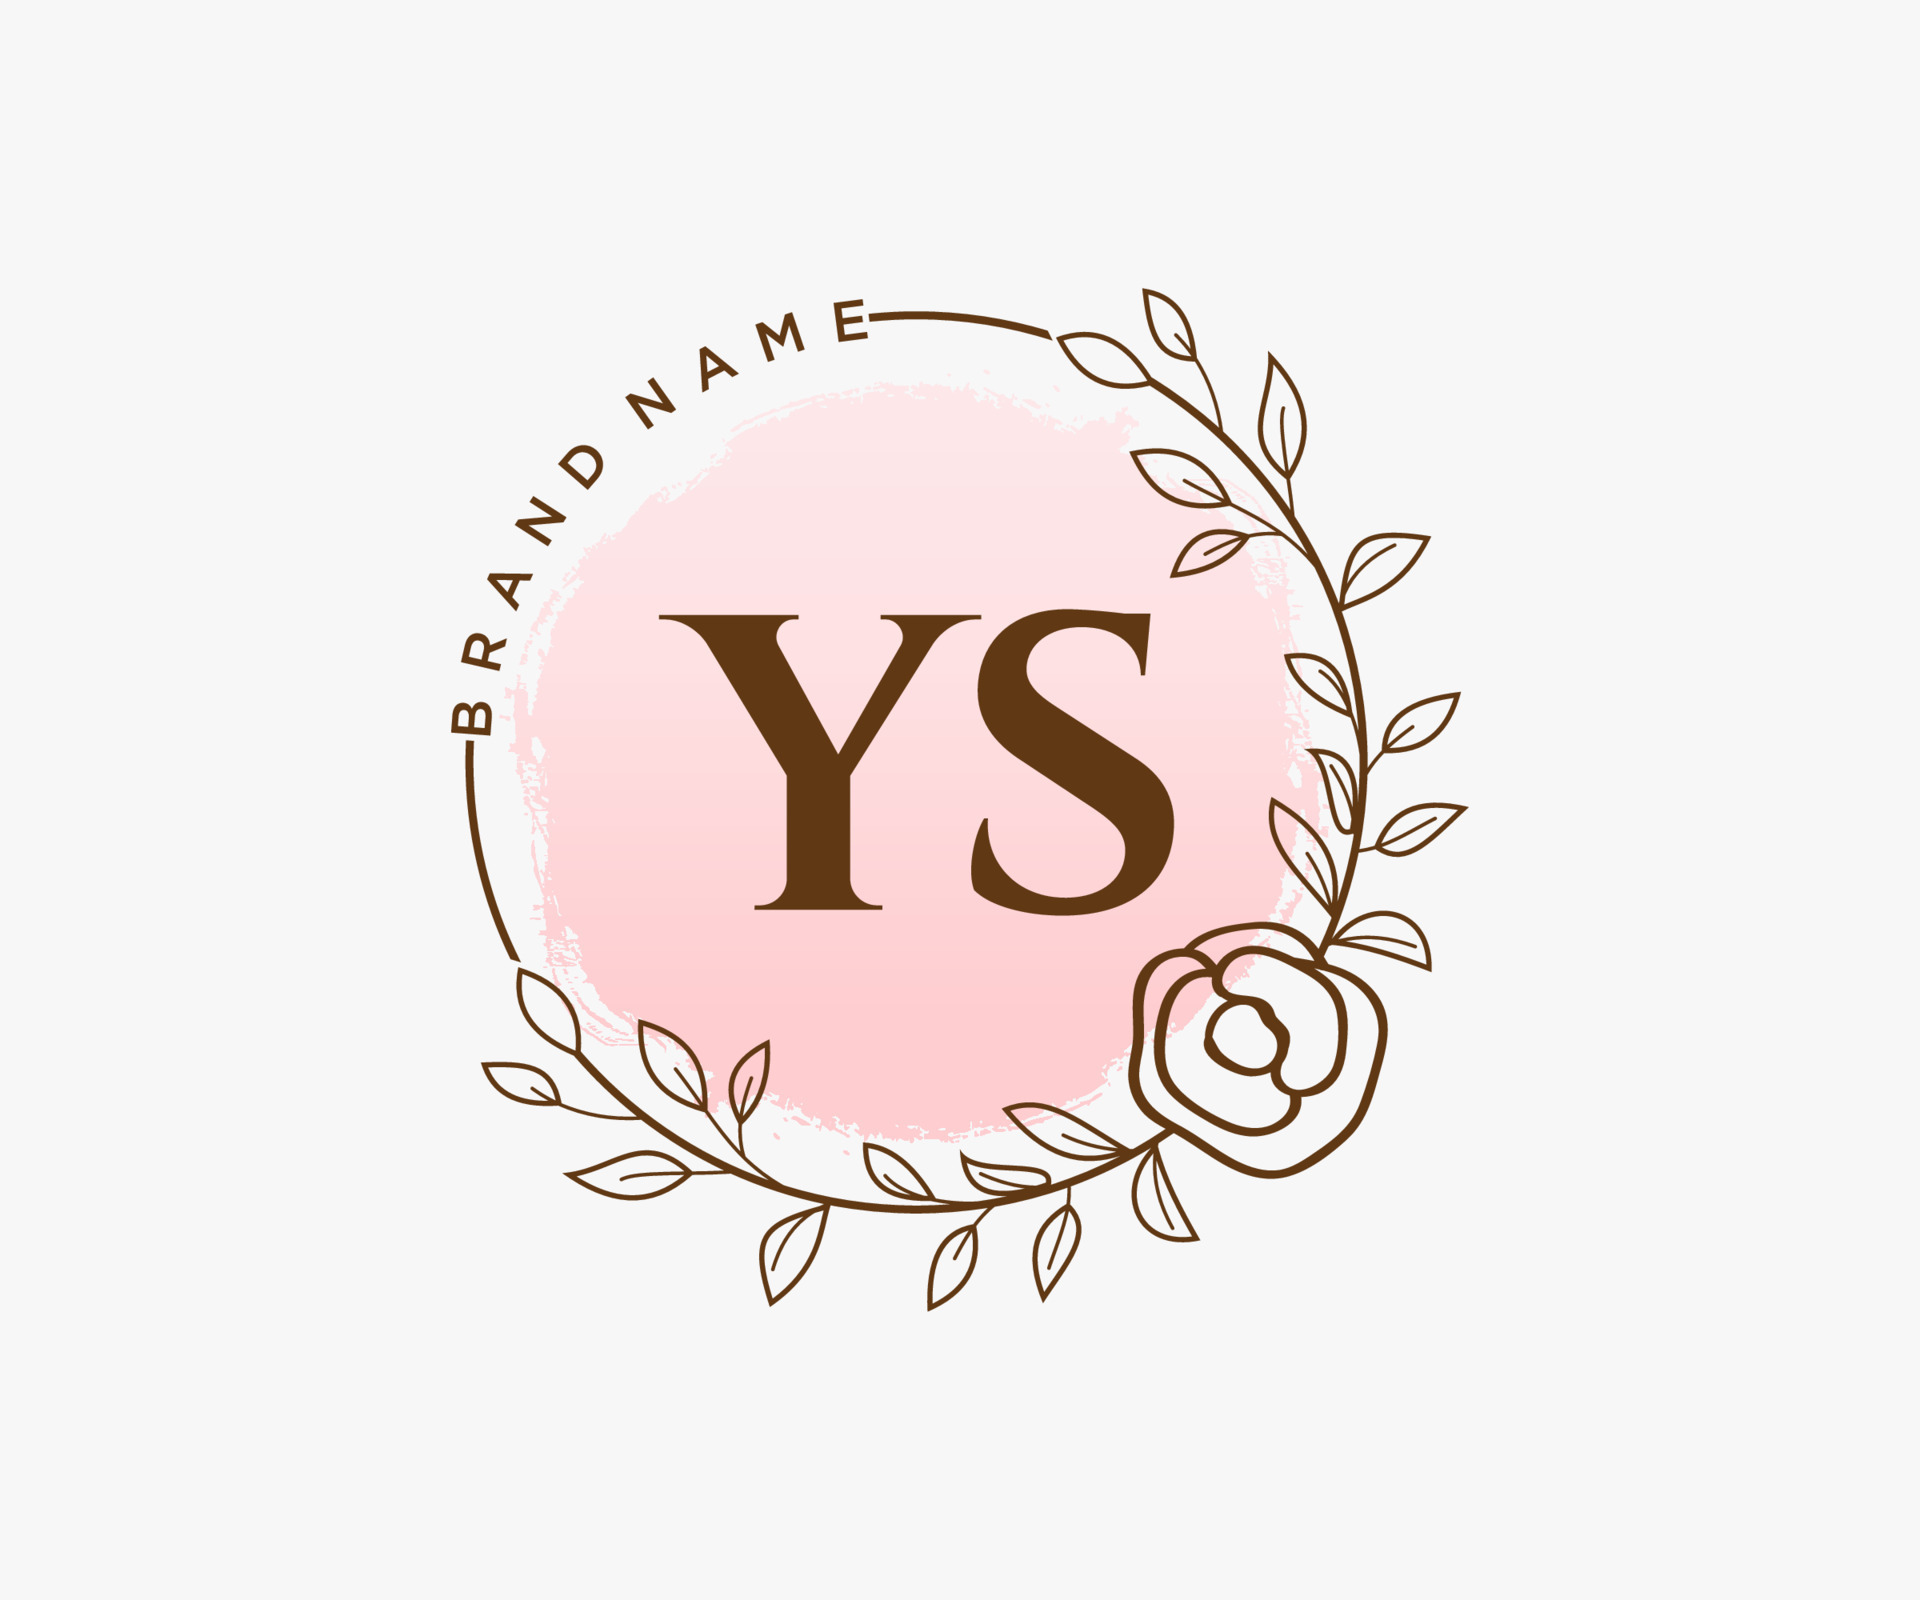 https://static.vecteezy.com/system/resources/previews/015/476/056/original/initial-ys-feminine-logo-usable-for-nature-salon-spa-cosmetic-and-beauty-logos-flat-logo-design-template-element-vector.jpg